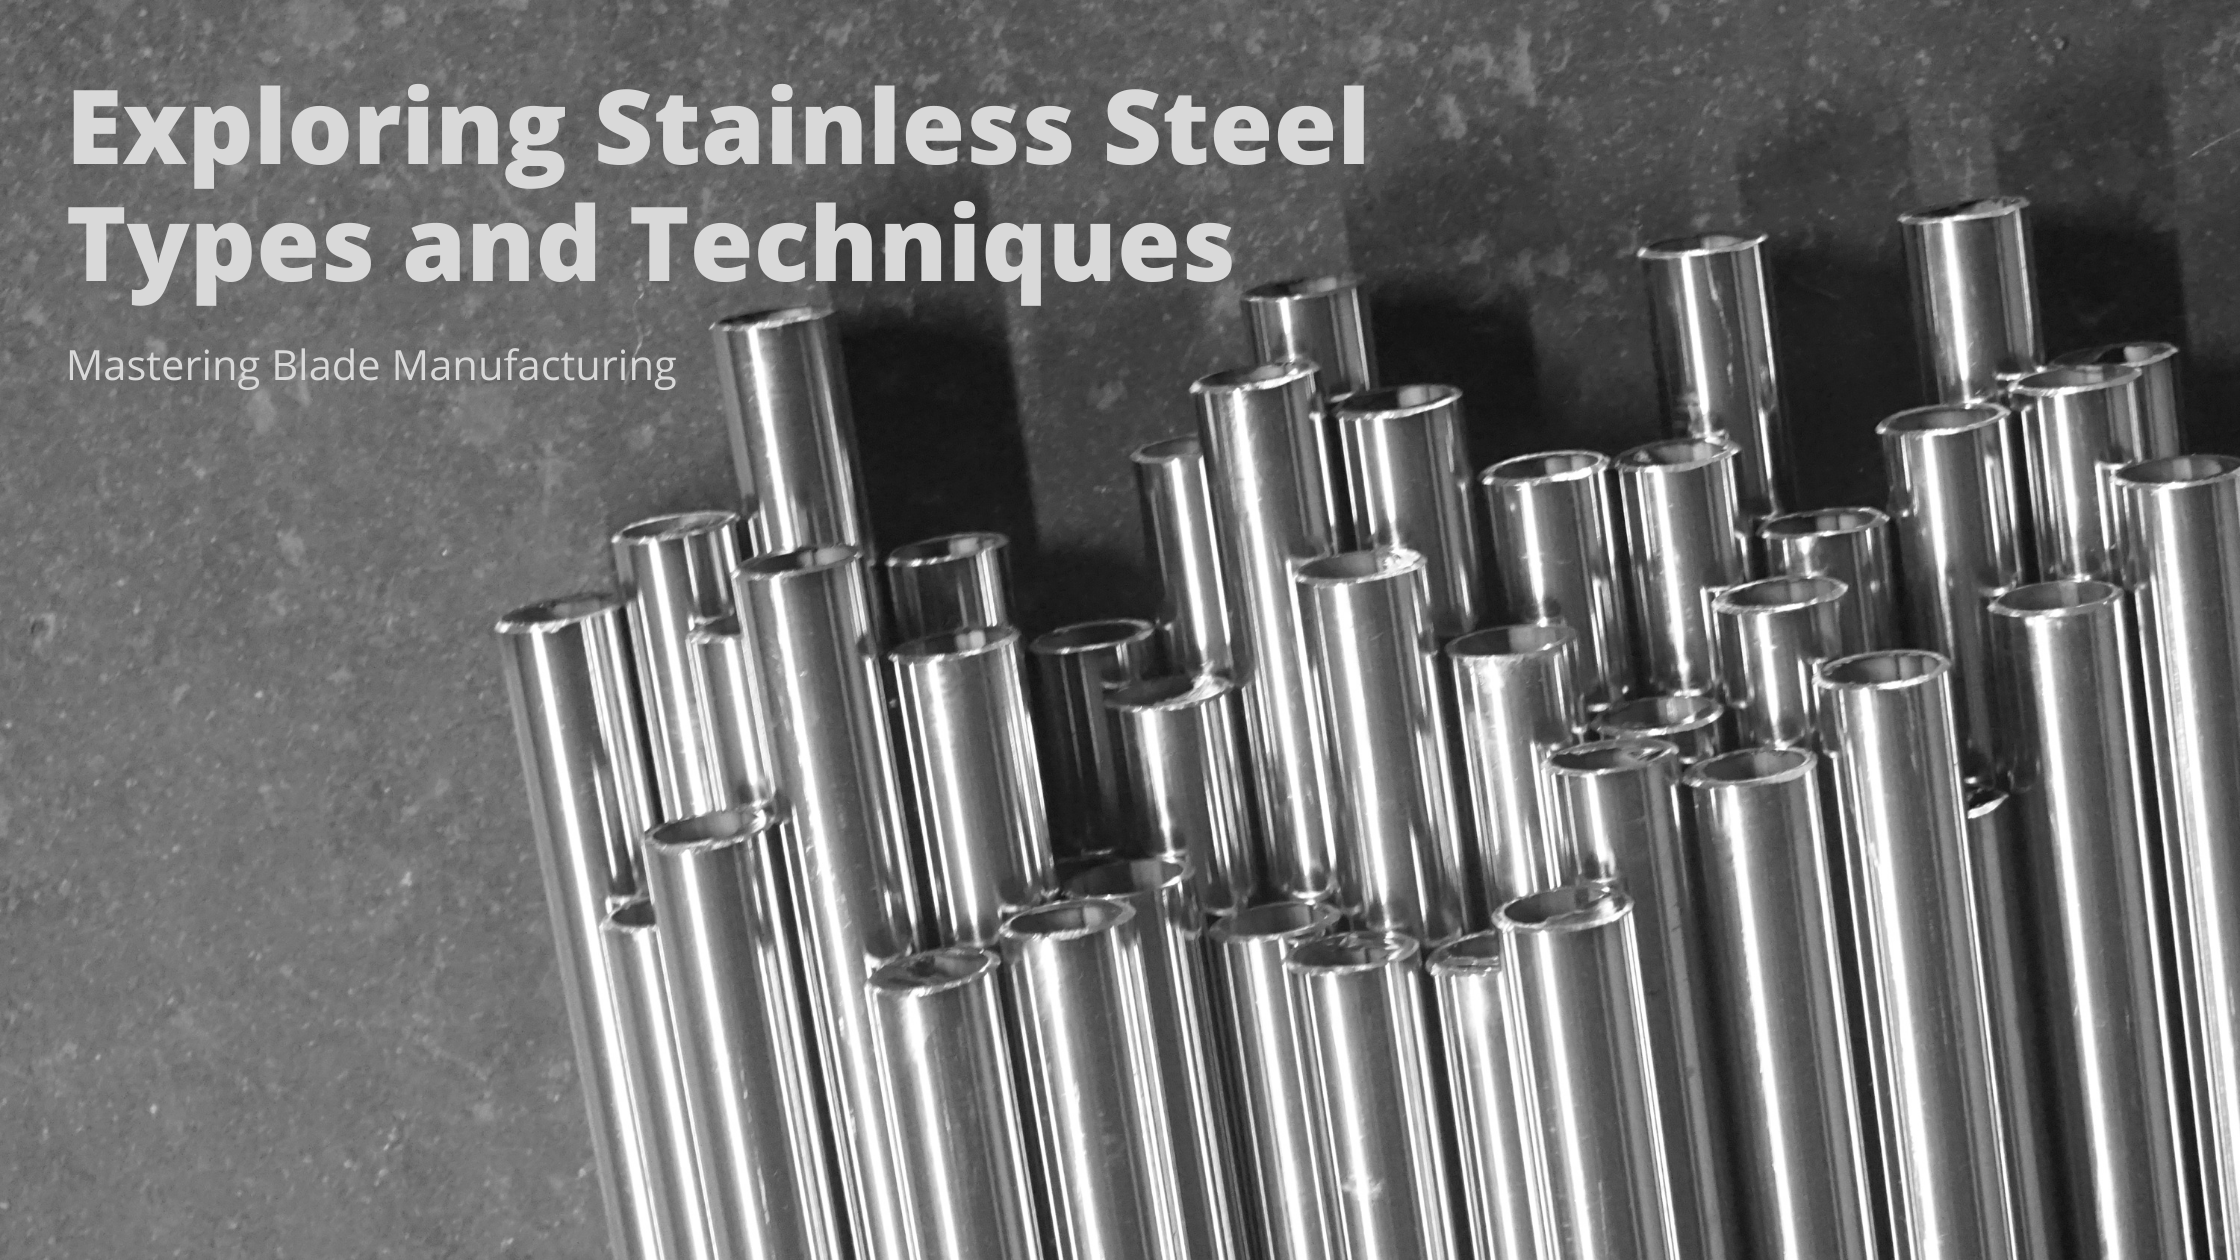 Mastering Blade Manufacturing: Exploring Stainless Steel Types and Techniques